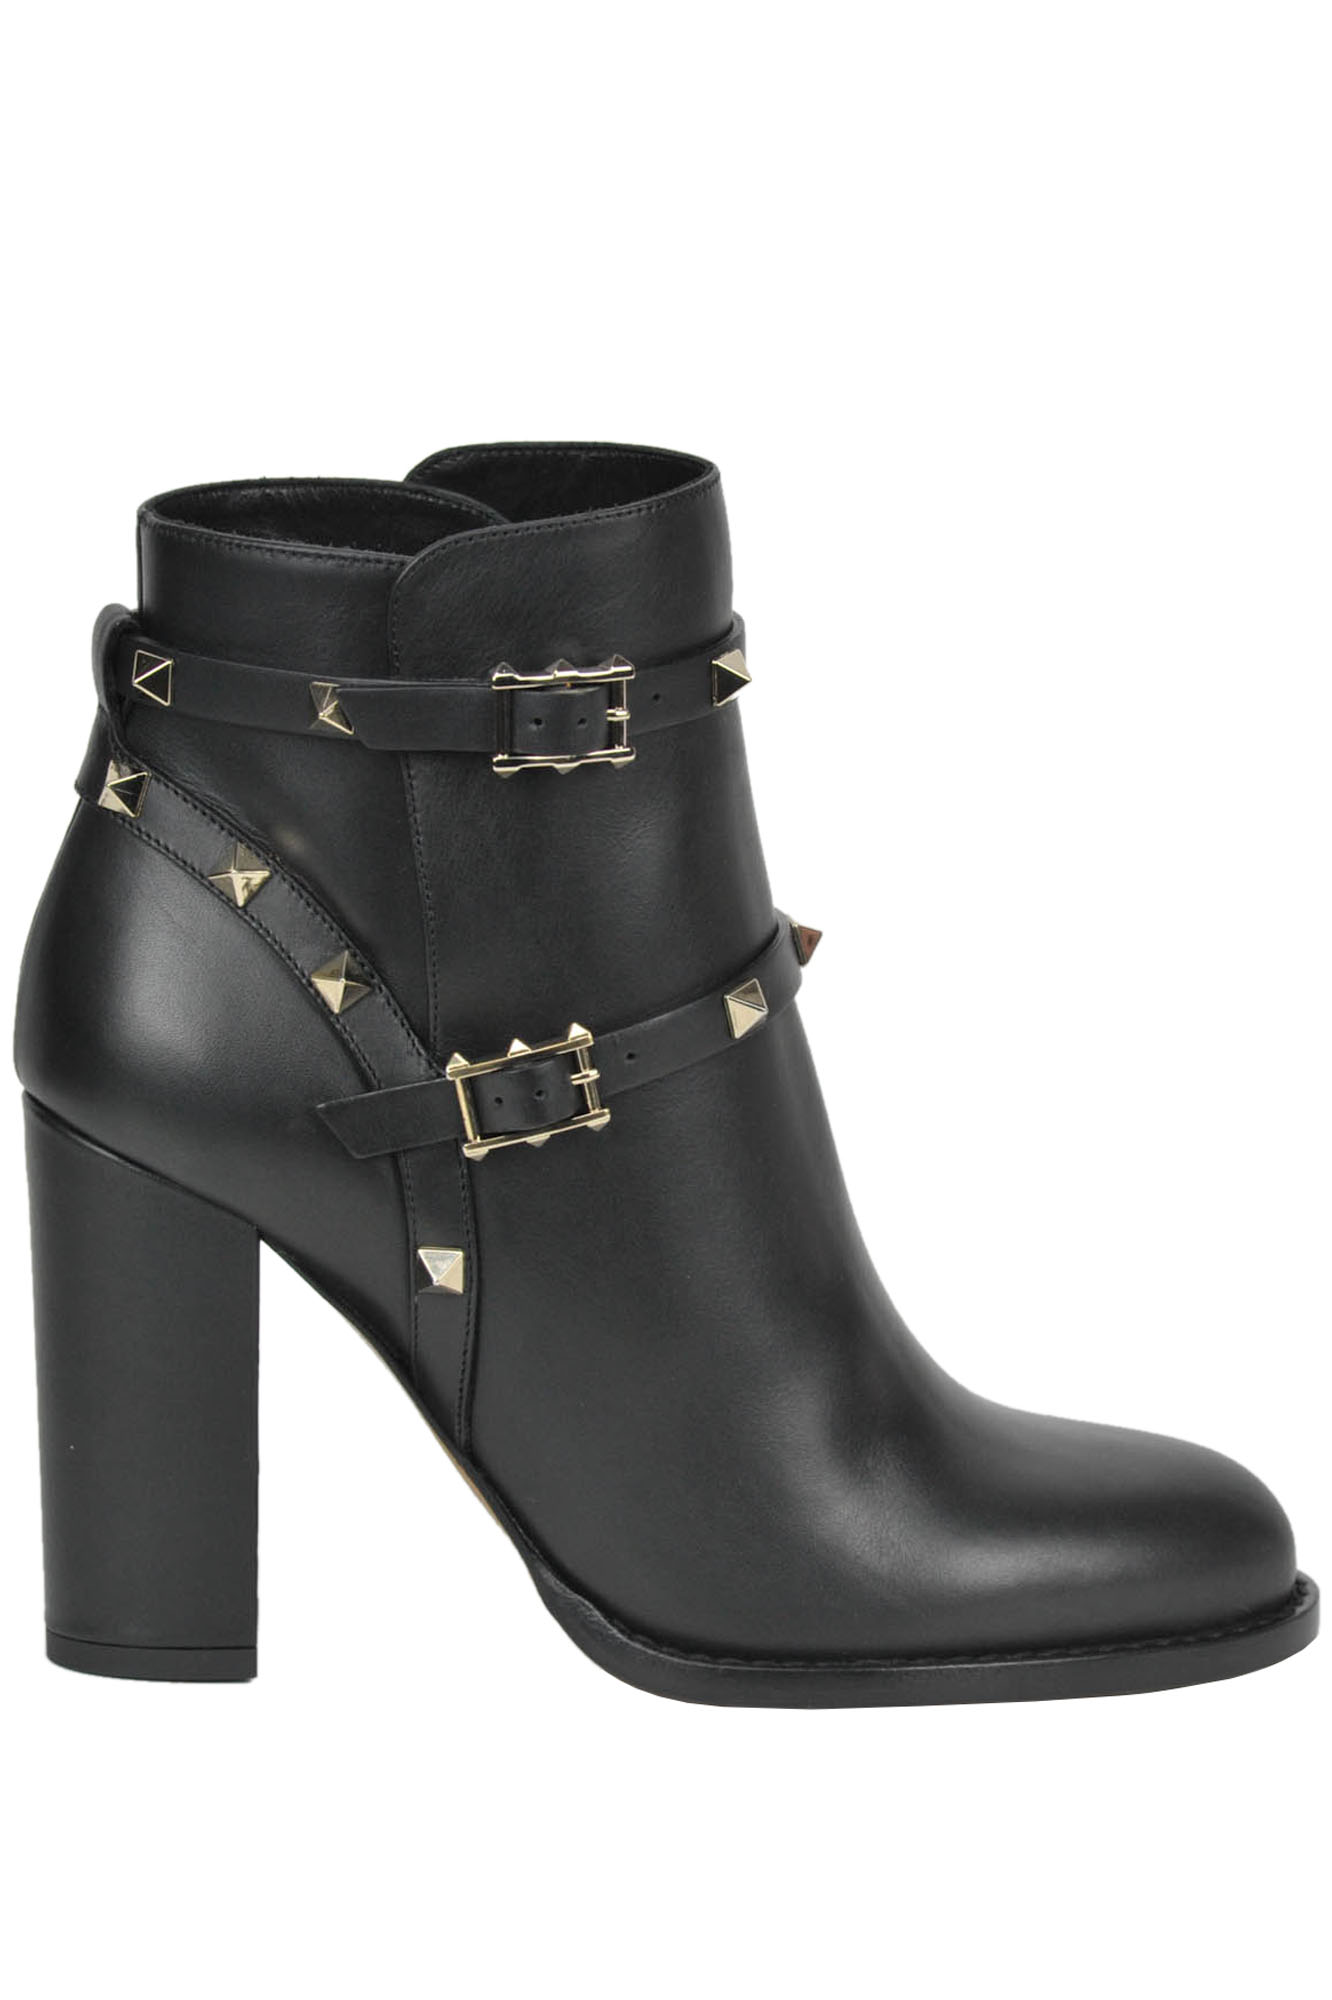 Valentino Rockstud leather ankle boots - Buy online on Glamest Fashion ...